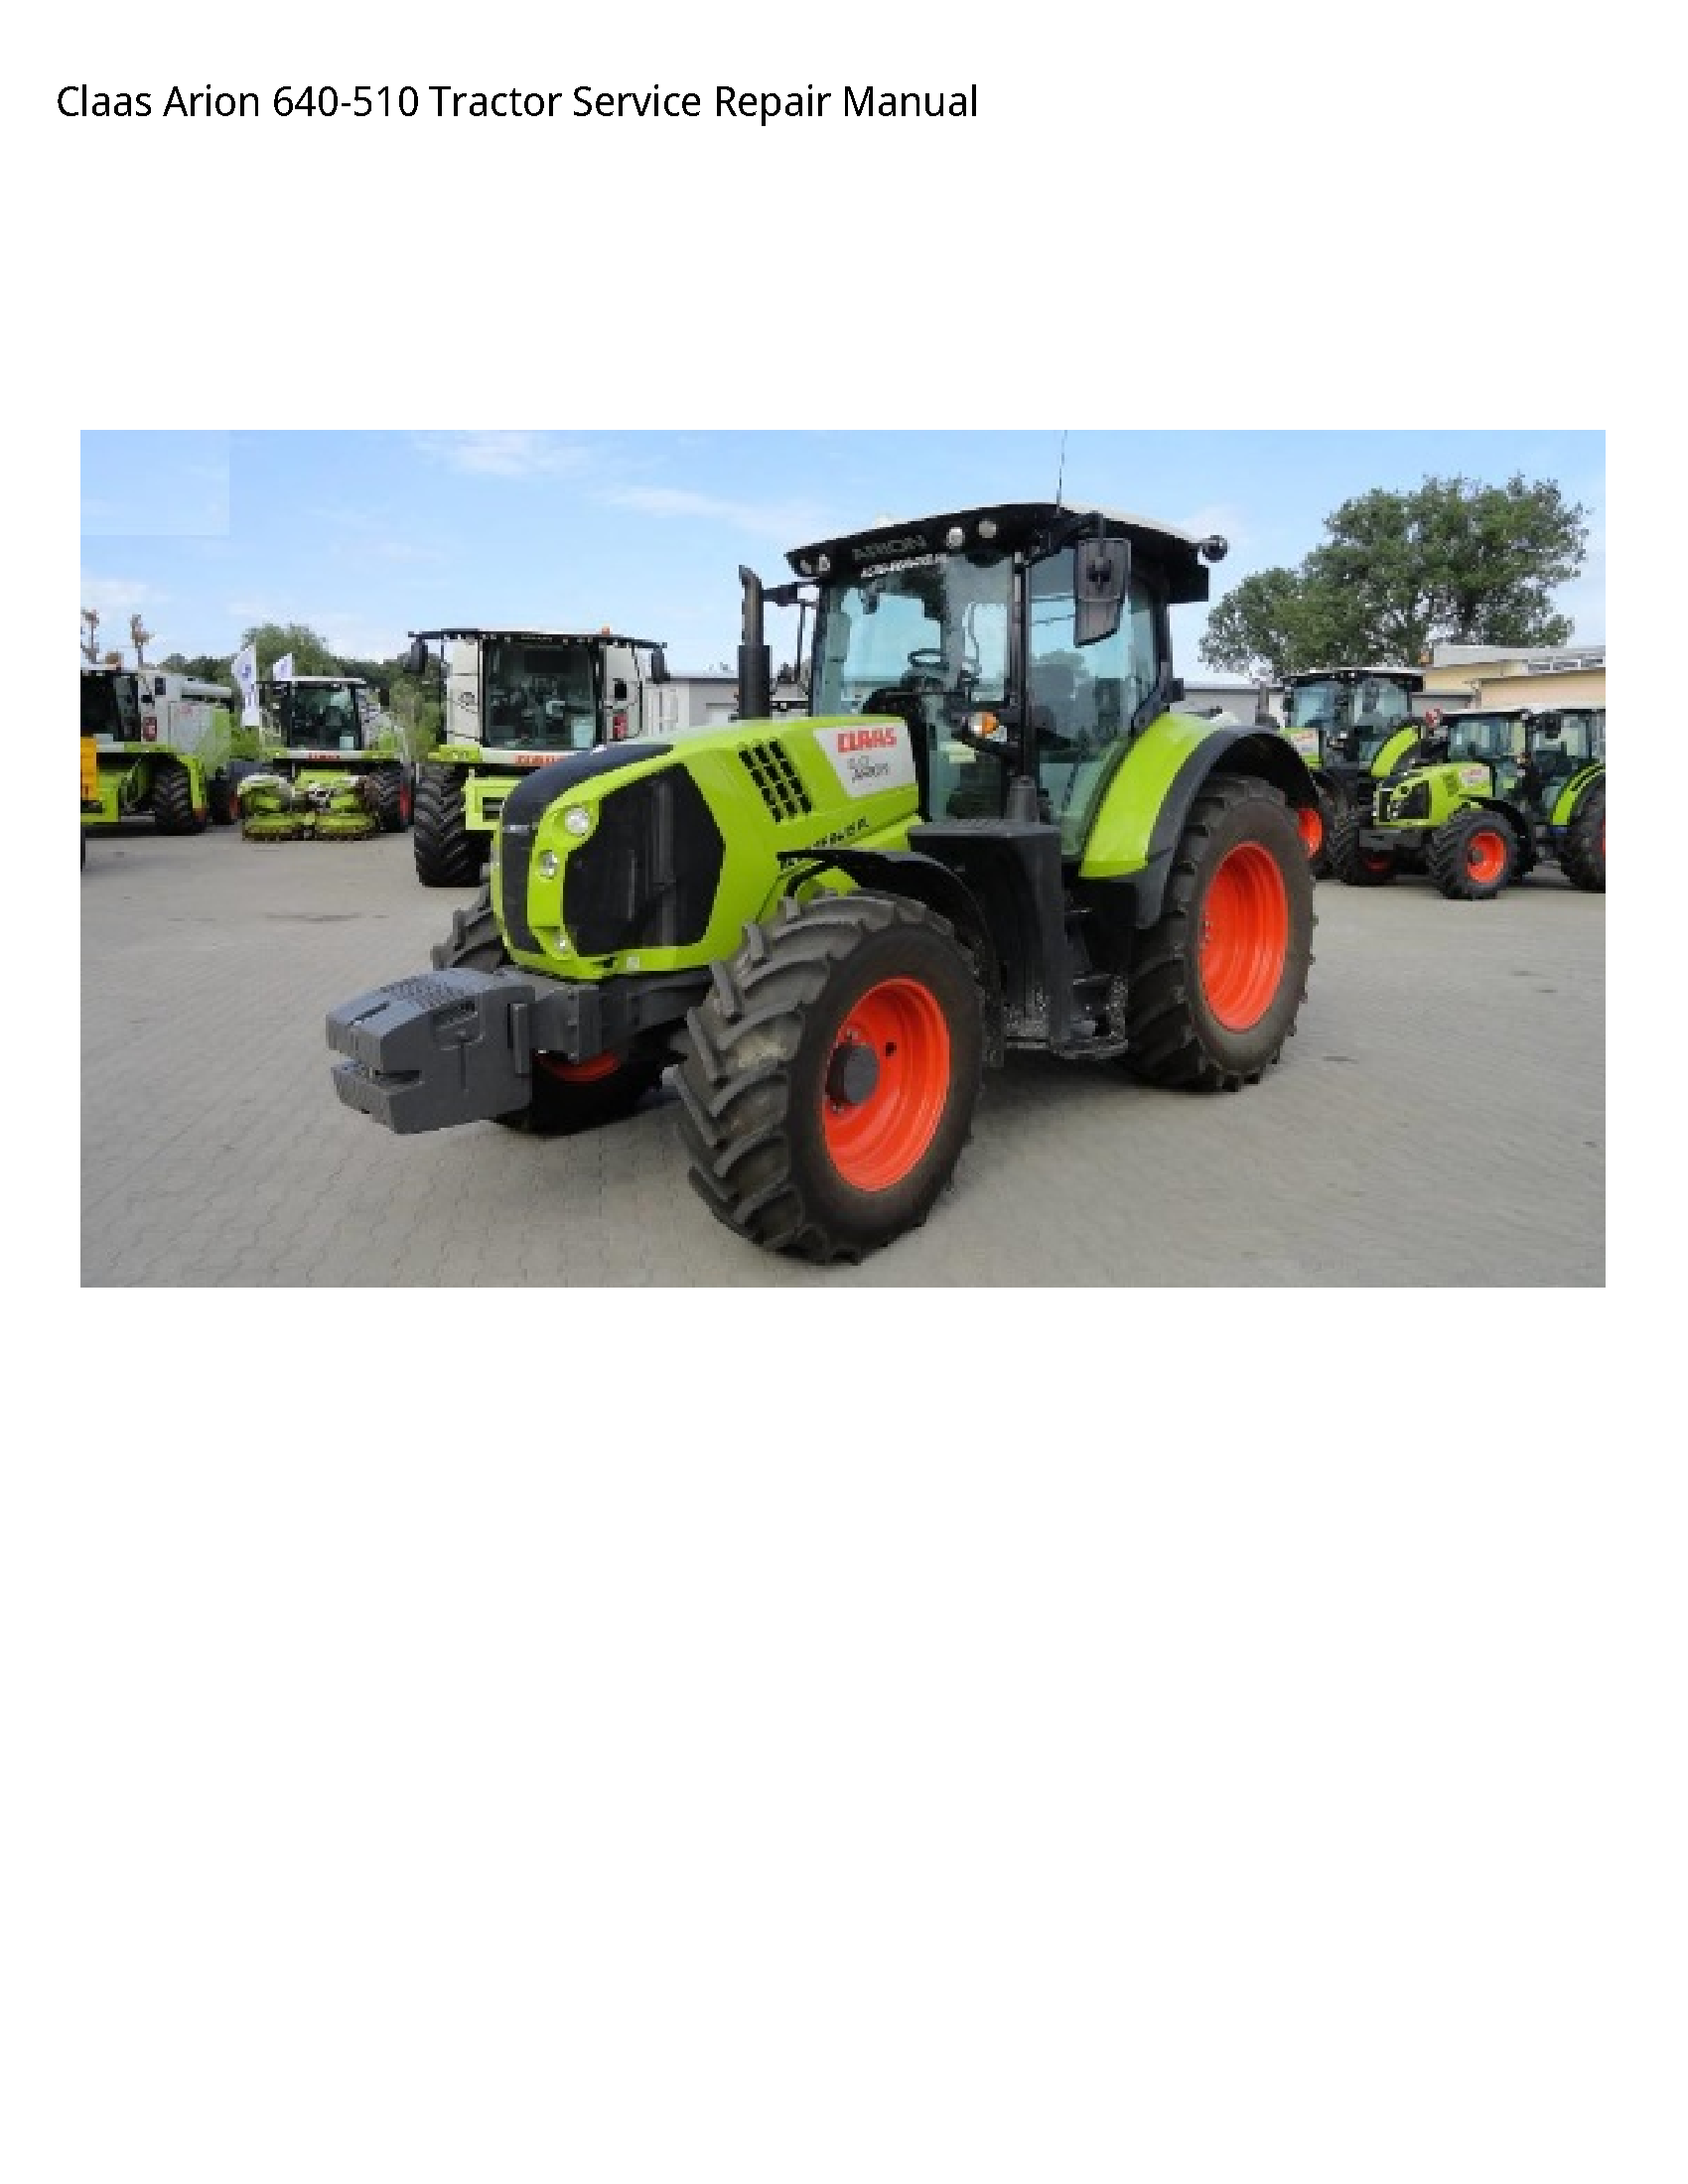 Claas 640-510 Arion Tractor manual